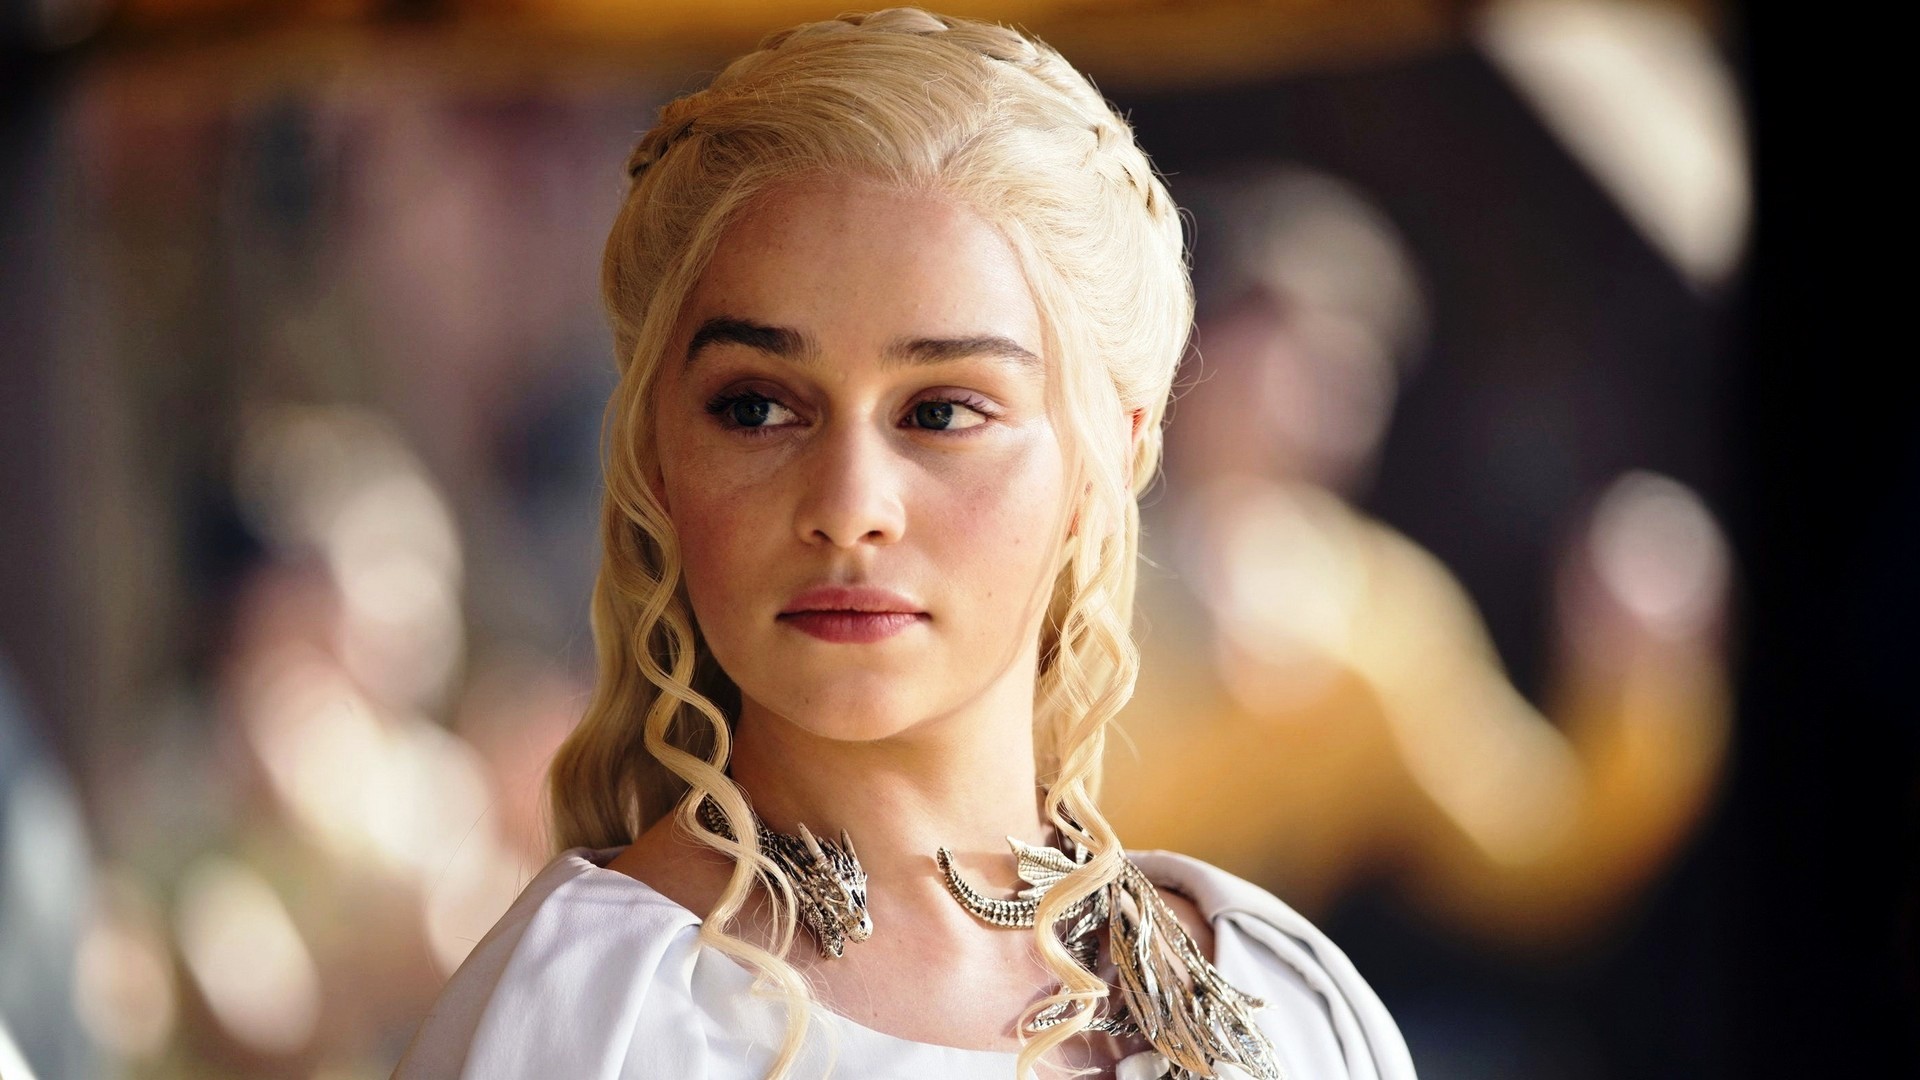 Game of Thrones Cast Emilia Clarke as Daenerys Targaryen Wallpaper with high-resolution 1920x1080 pixel. You can use this poster wallpaper for your Desktop Computers, Mac Screensavers, Windows Backgrounds, iPhone Wallpapers, Tablet or Android Lock screen and another Mobile device